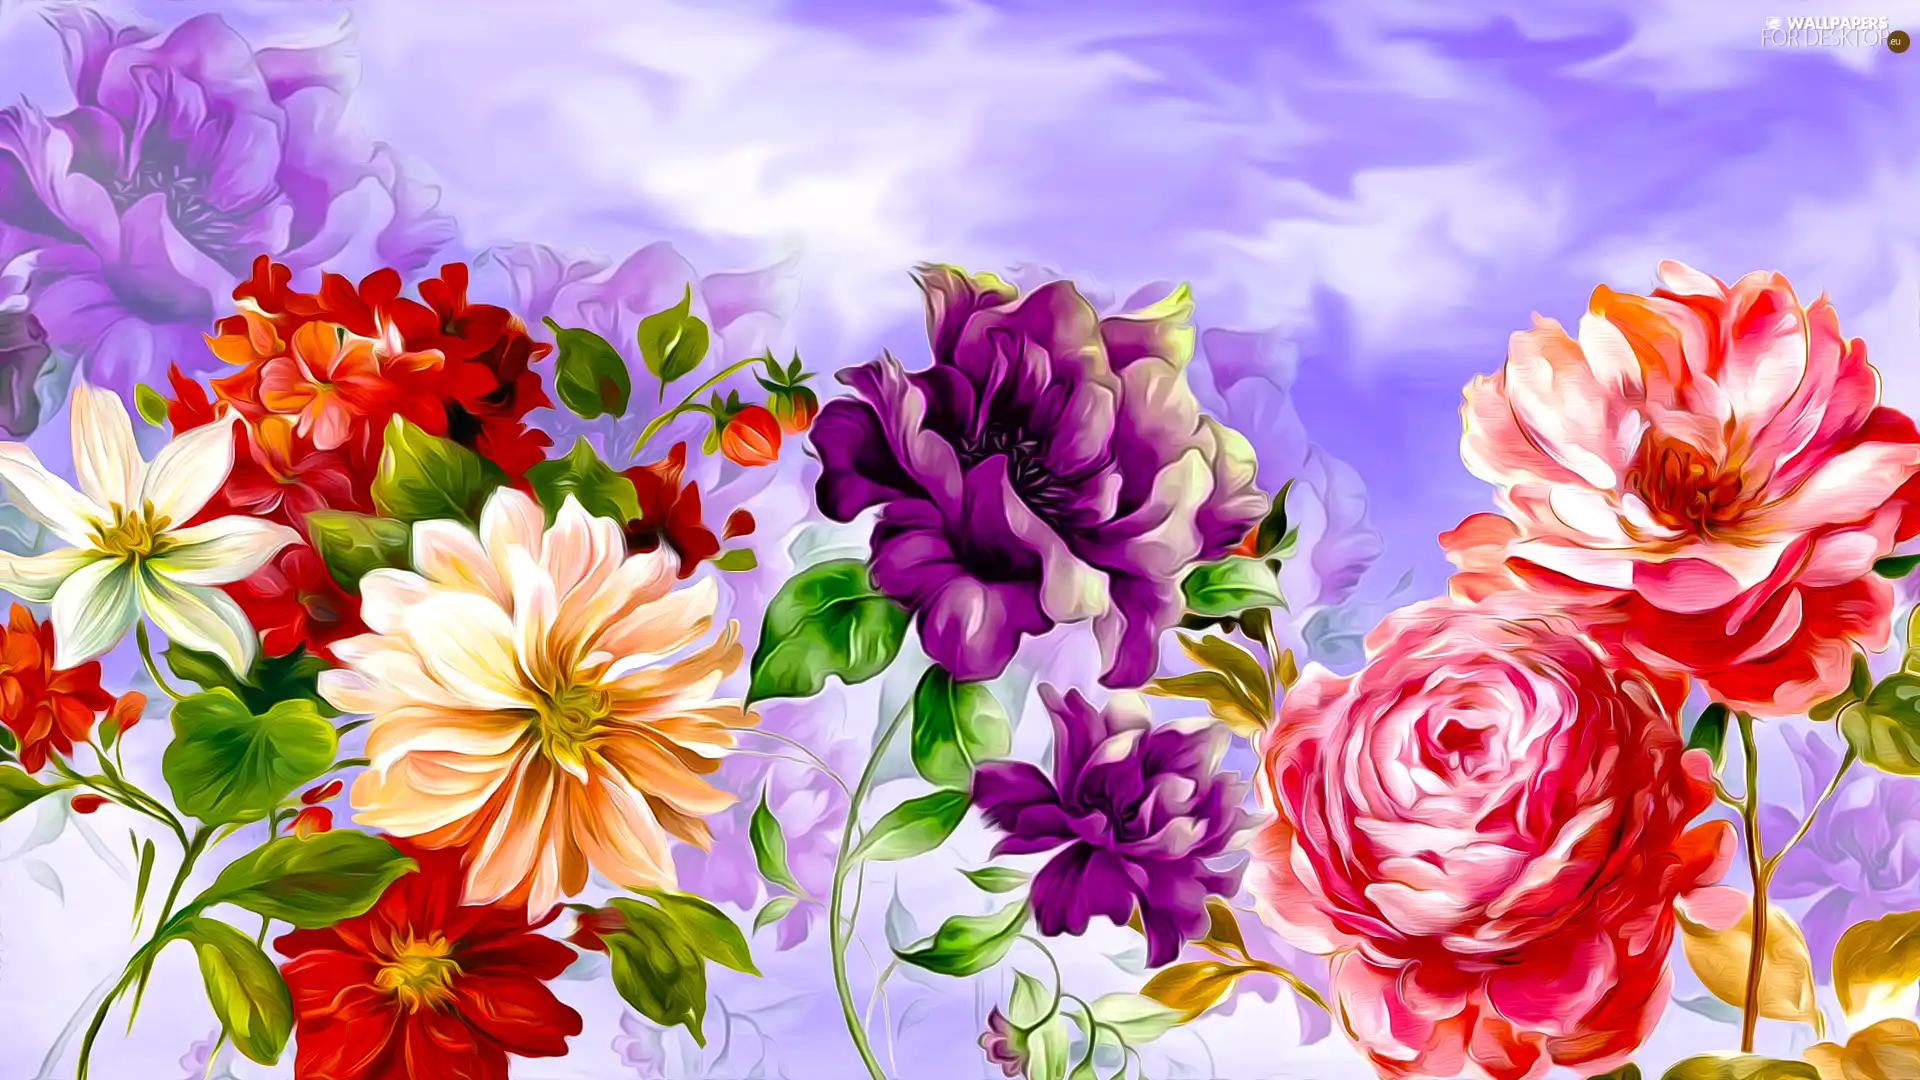 Flowers, graphics, Yellow, purple, Red - For desktop wallpapers: 1920x1080